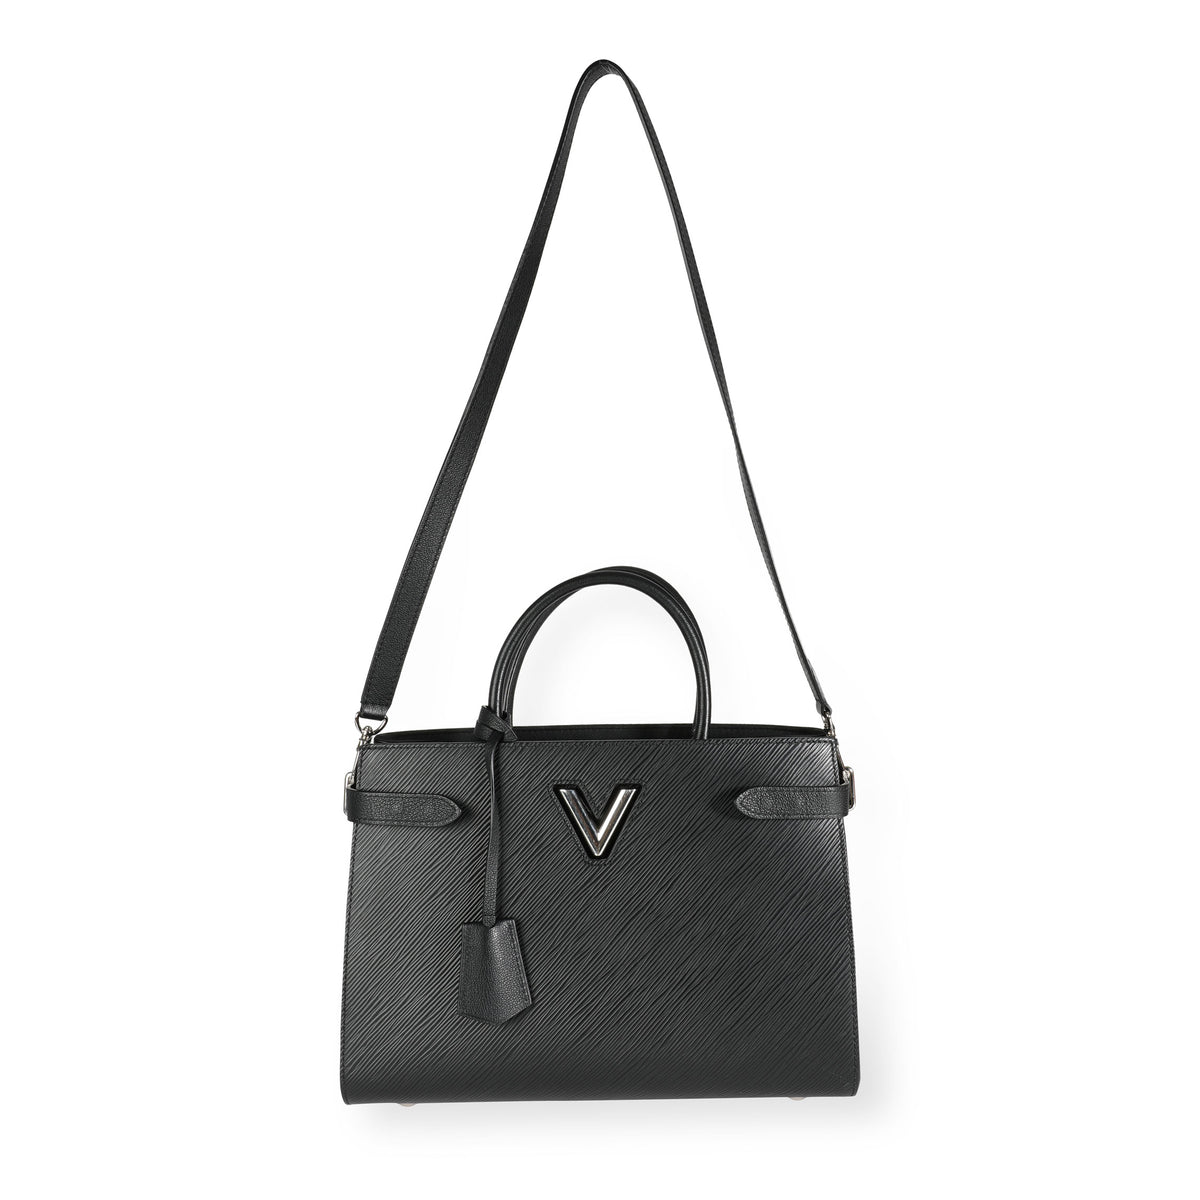 Louis Vuitton Black Epi Leather Twist Tote at Jill's Consignment